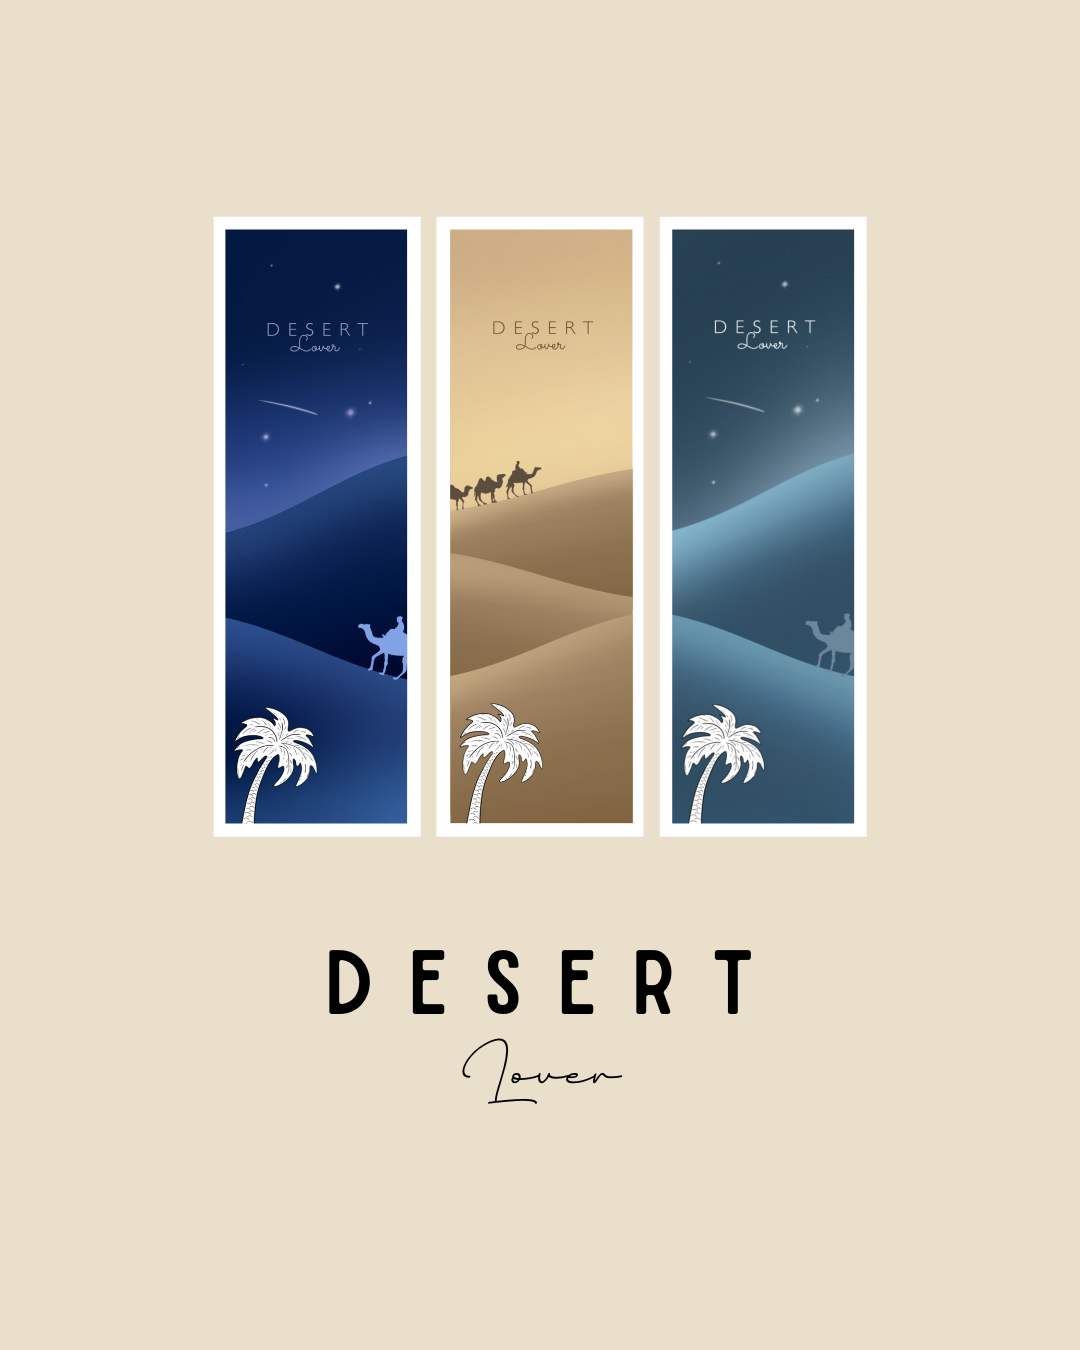 Marque-pages "DESERT Lover"